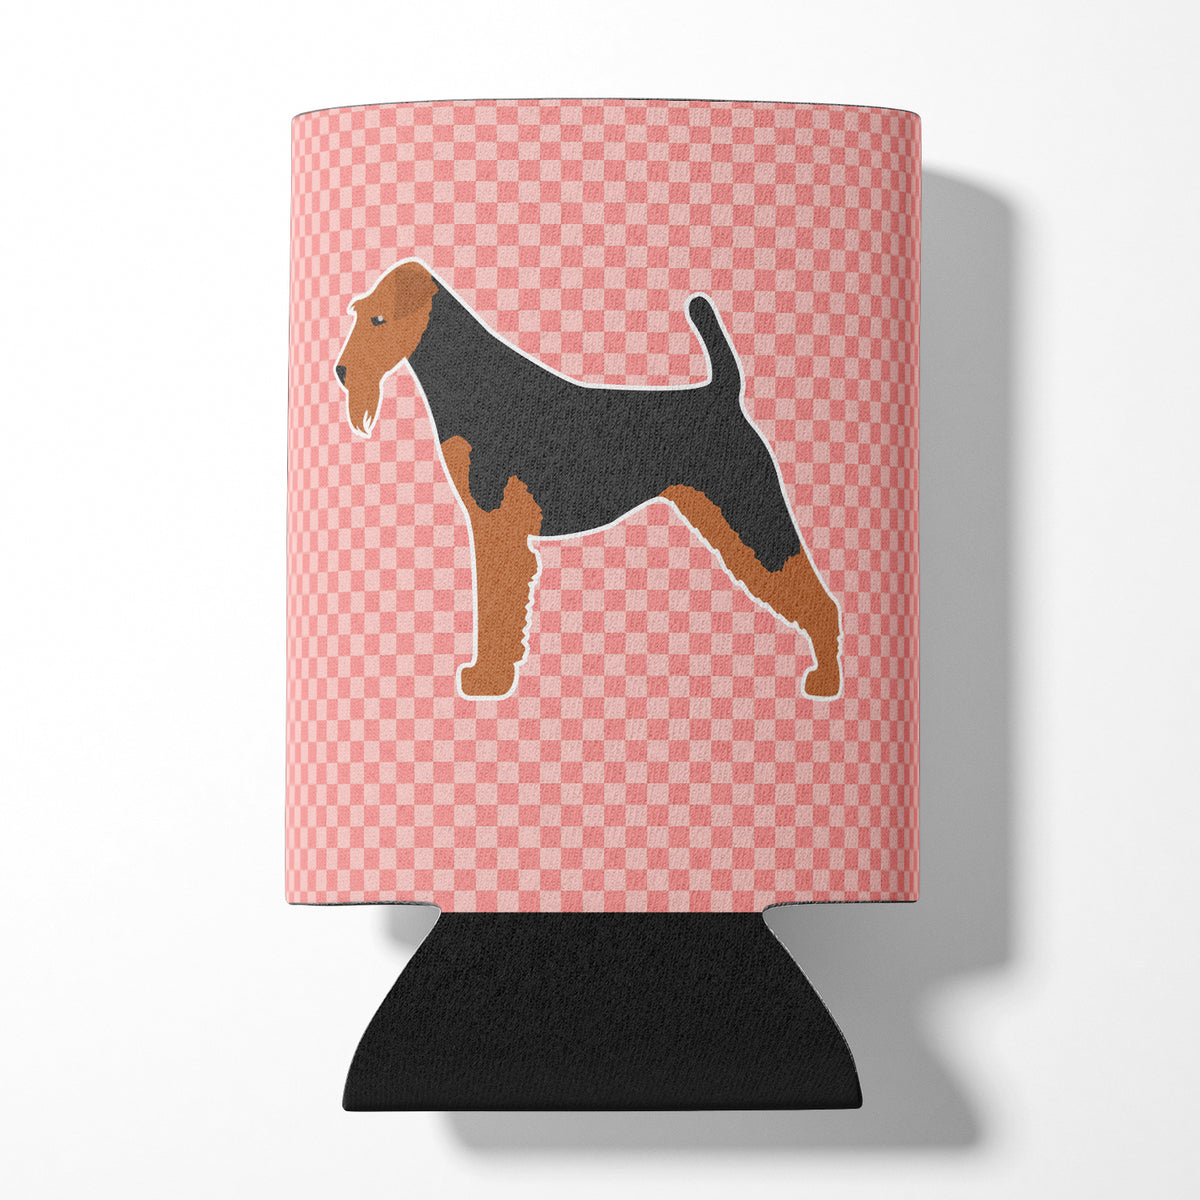 Airedale Terrier Checkerboard Pink Can or Bottle Hugger BB3657CC  the-store.com.